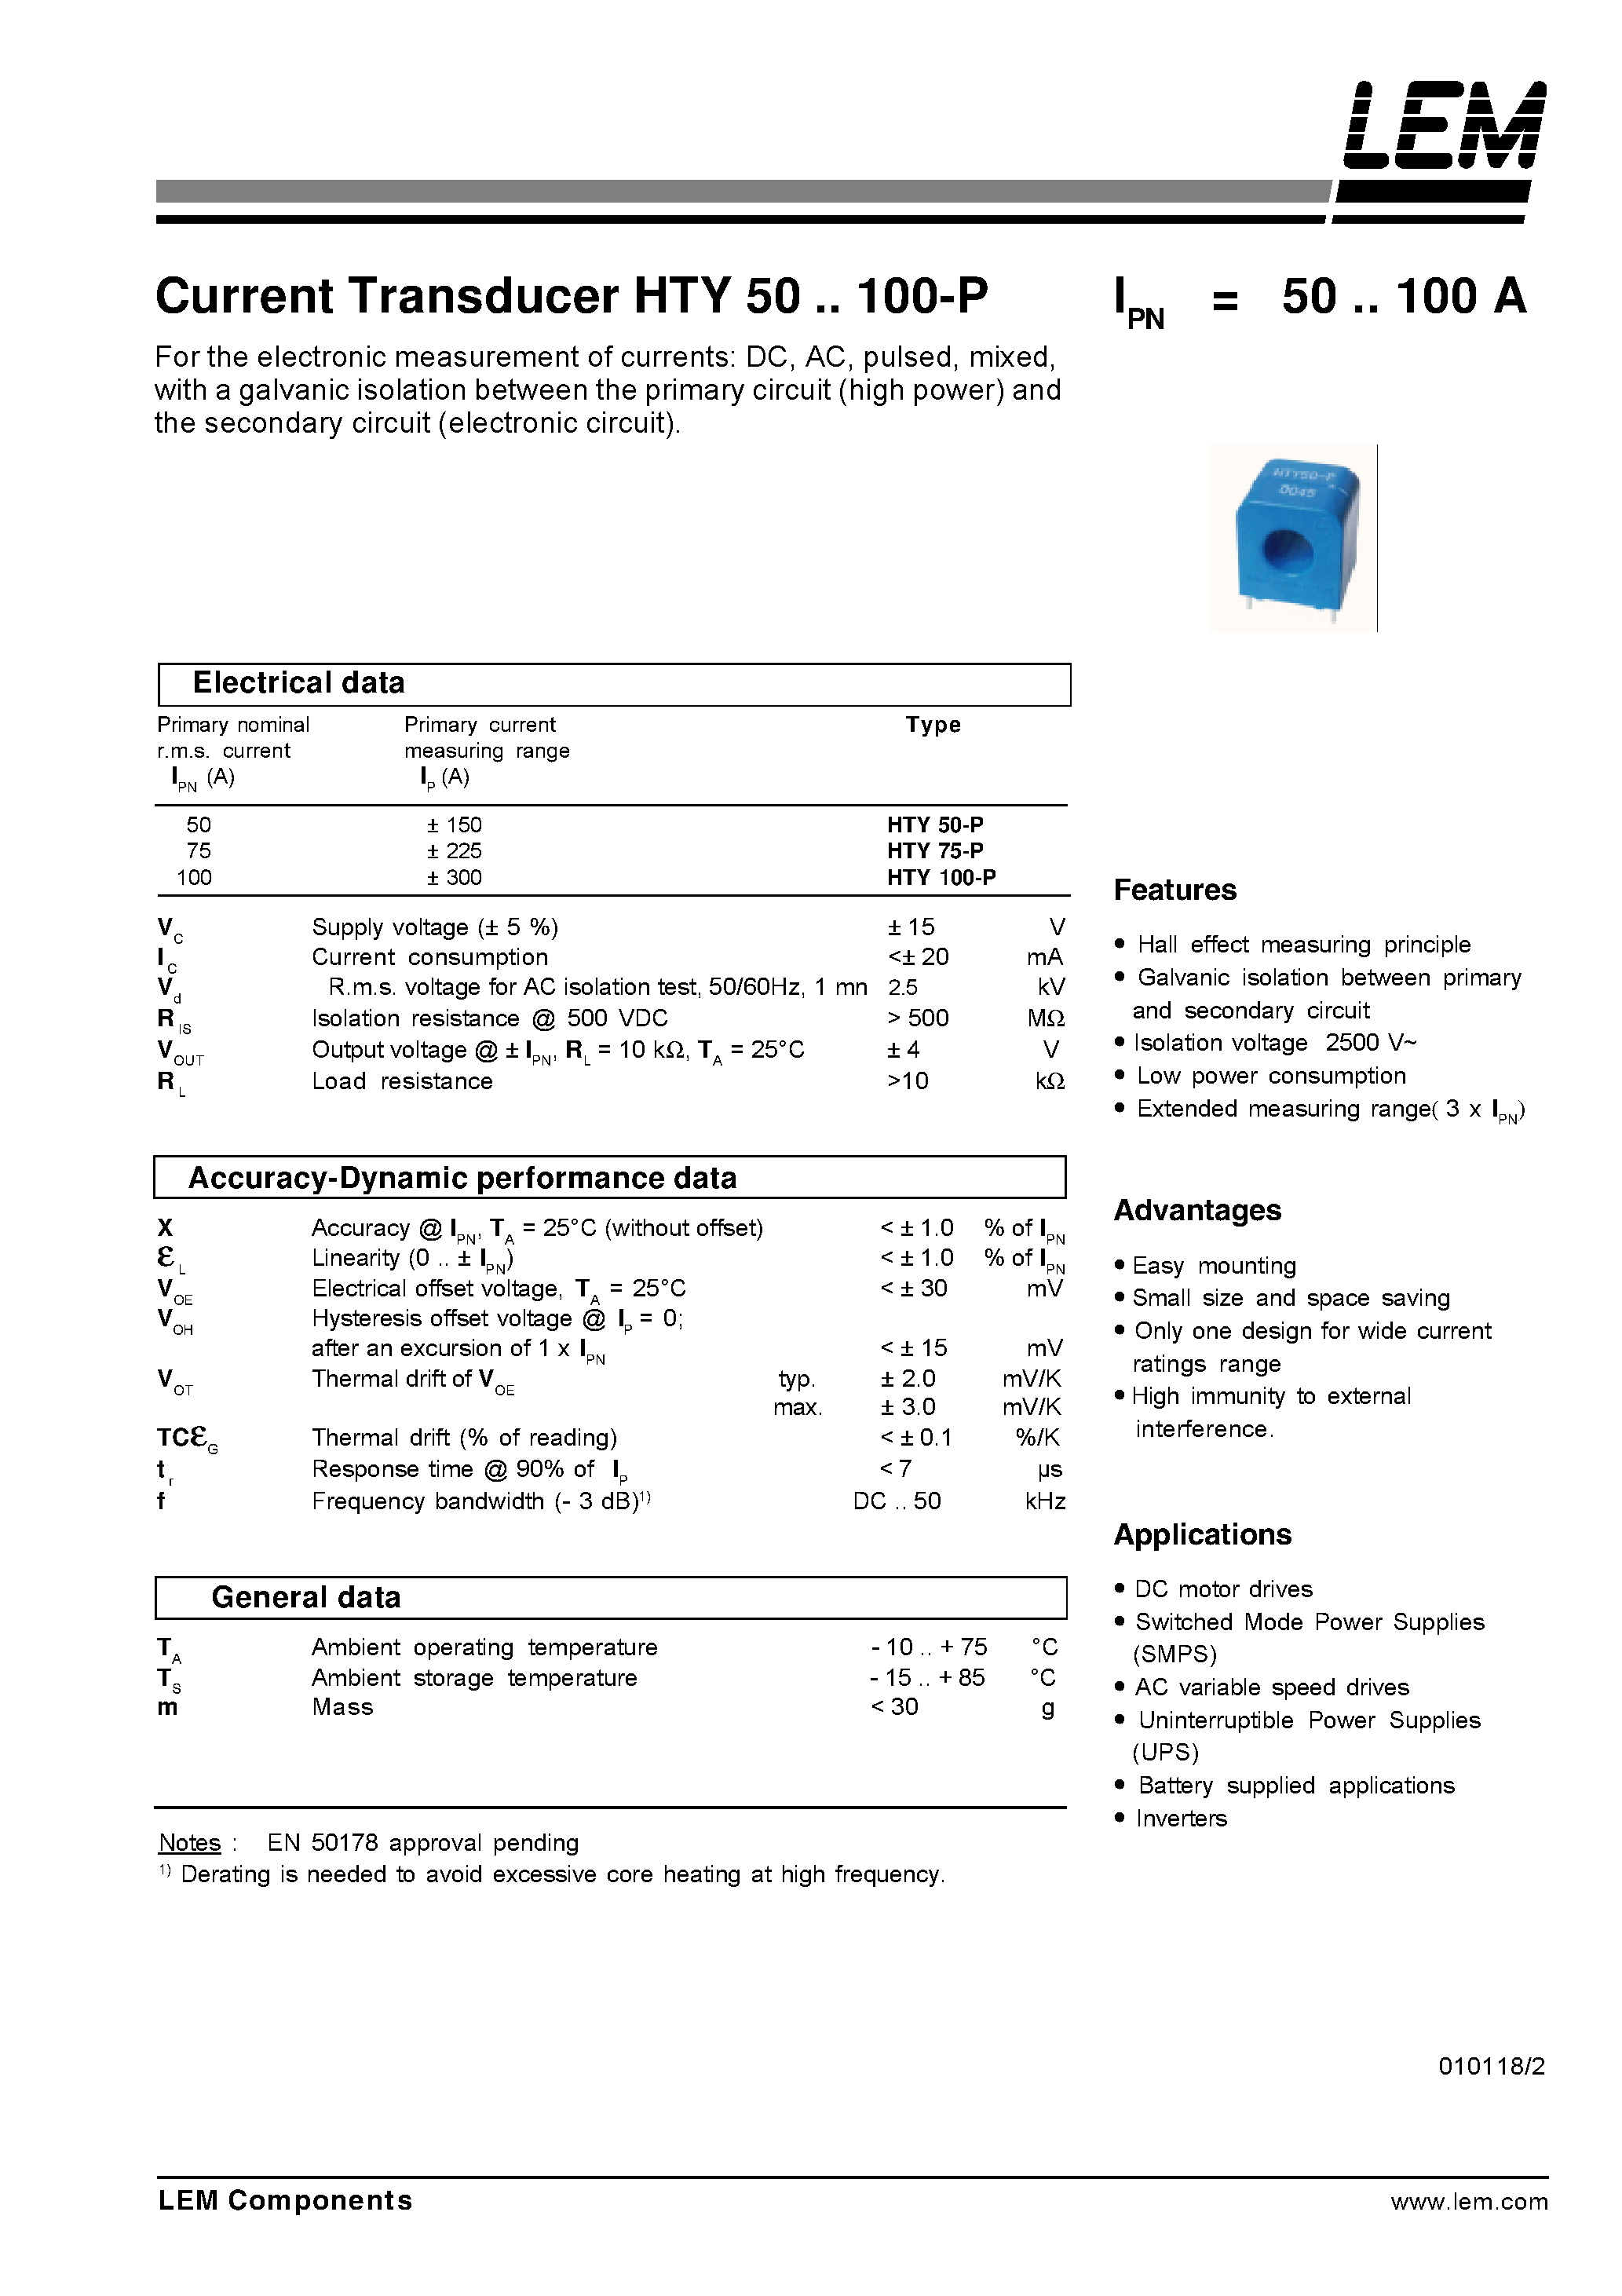 Datasheet HTY100-P - Current Transducer HTY 50~100-P page 1